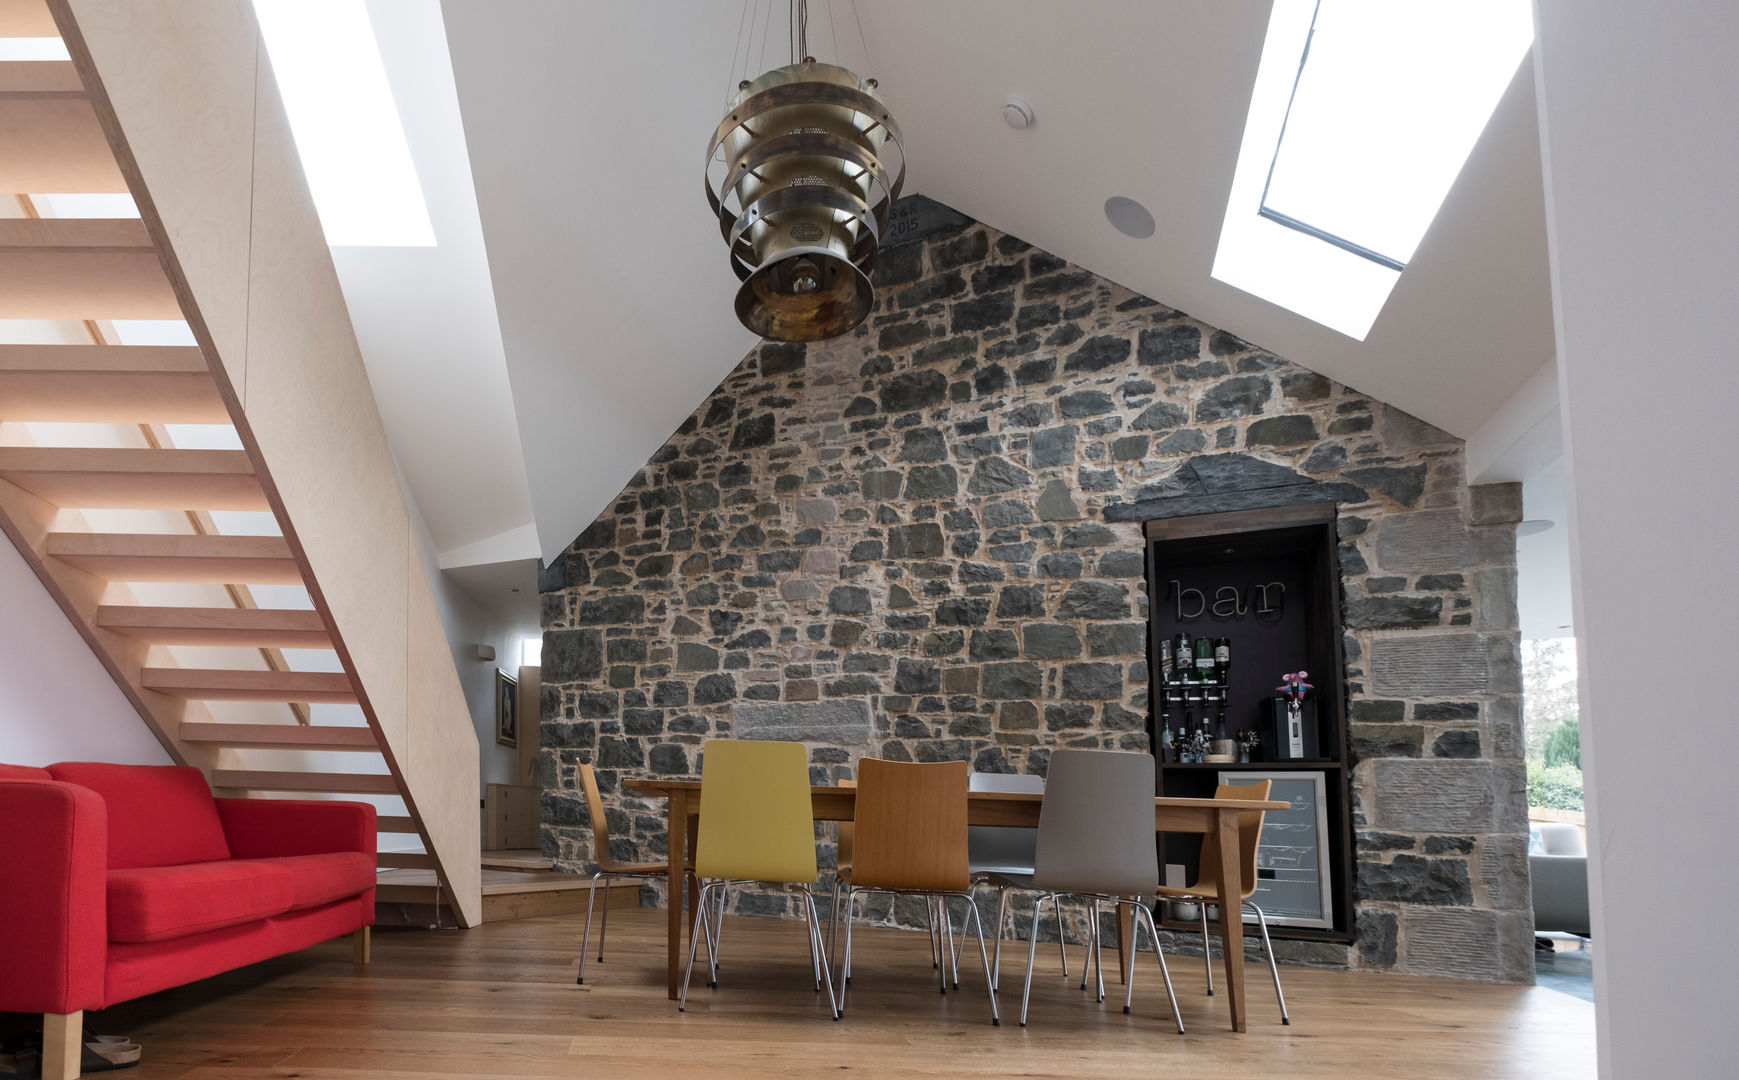 Dining room with exposed stone wall Woodside Parker Kirk Architects Comedores de estilo moderno Stone,Dining table,Bespoke,Bespoke Staircase,Plywood,Red sofa,Bar,Beer fridge,Rooflight,Daylight,Pendant light,Reclaimed